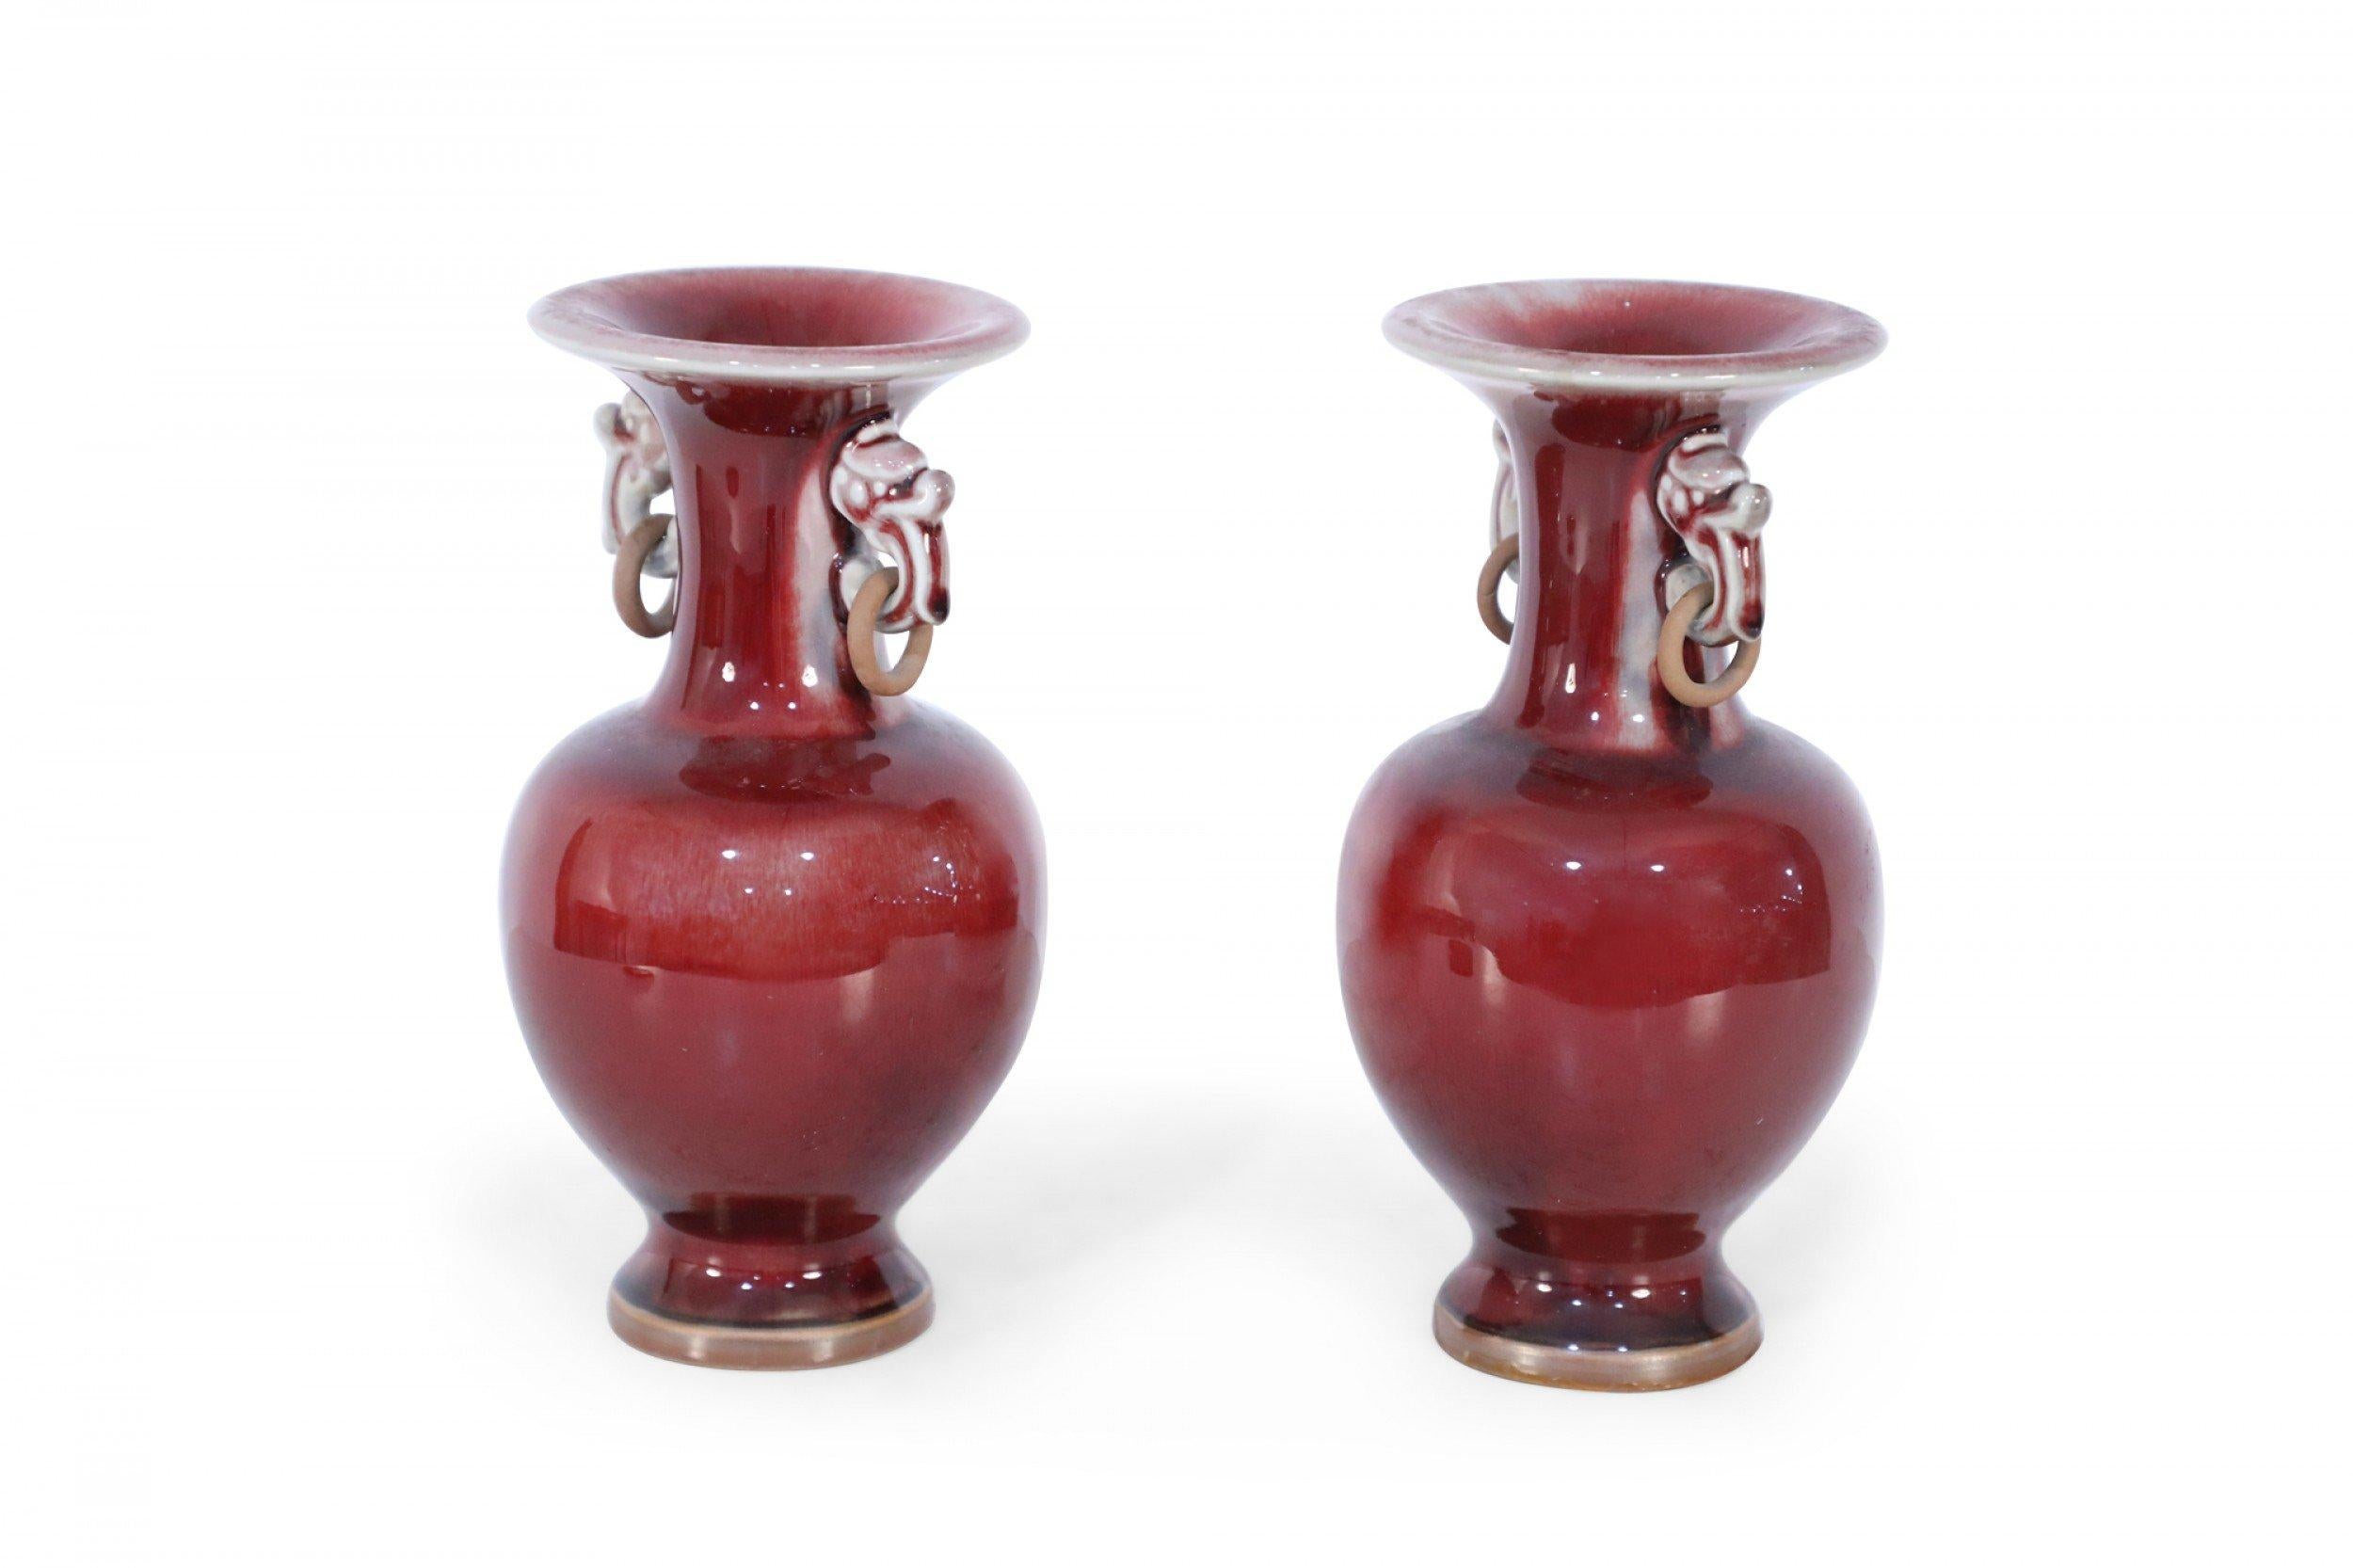 Pair of Chinese oxblood red vases with fluted necks, accentuated by figurative ears holding wooden rings, leading to bulbous lower halves, atop a small, round foot (priced as pair).
      